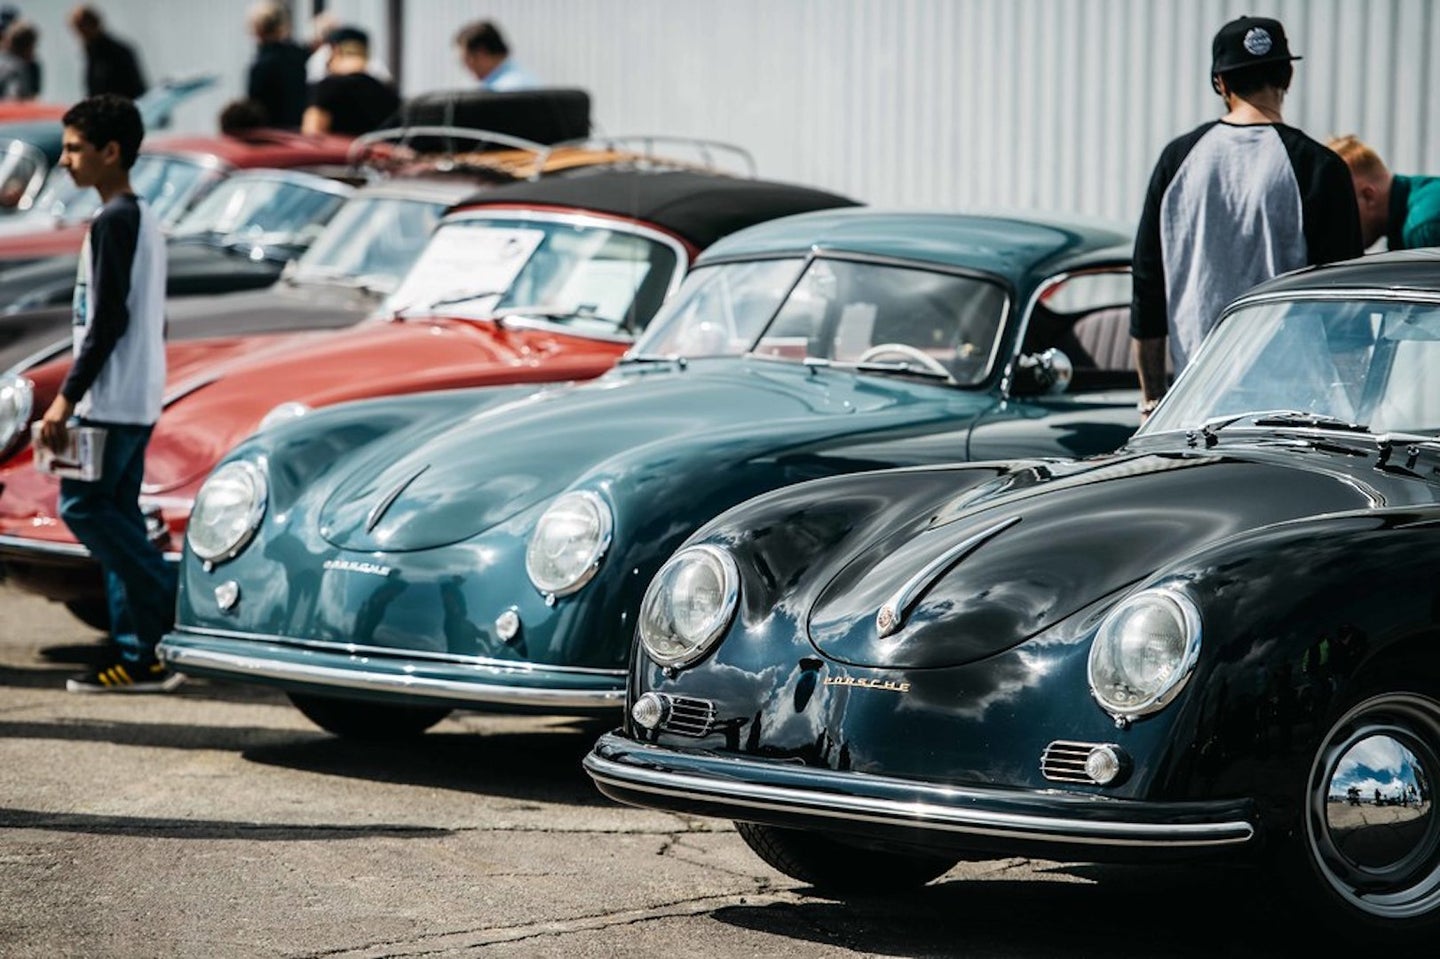 4th Annual Air-Cooled Porsche Celebration Luftgekühlt Will Be on May 7, 2017